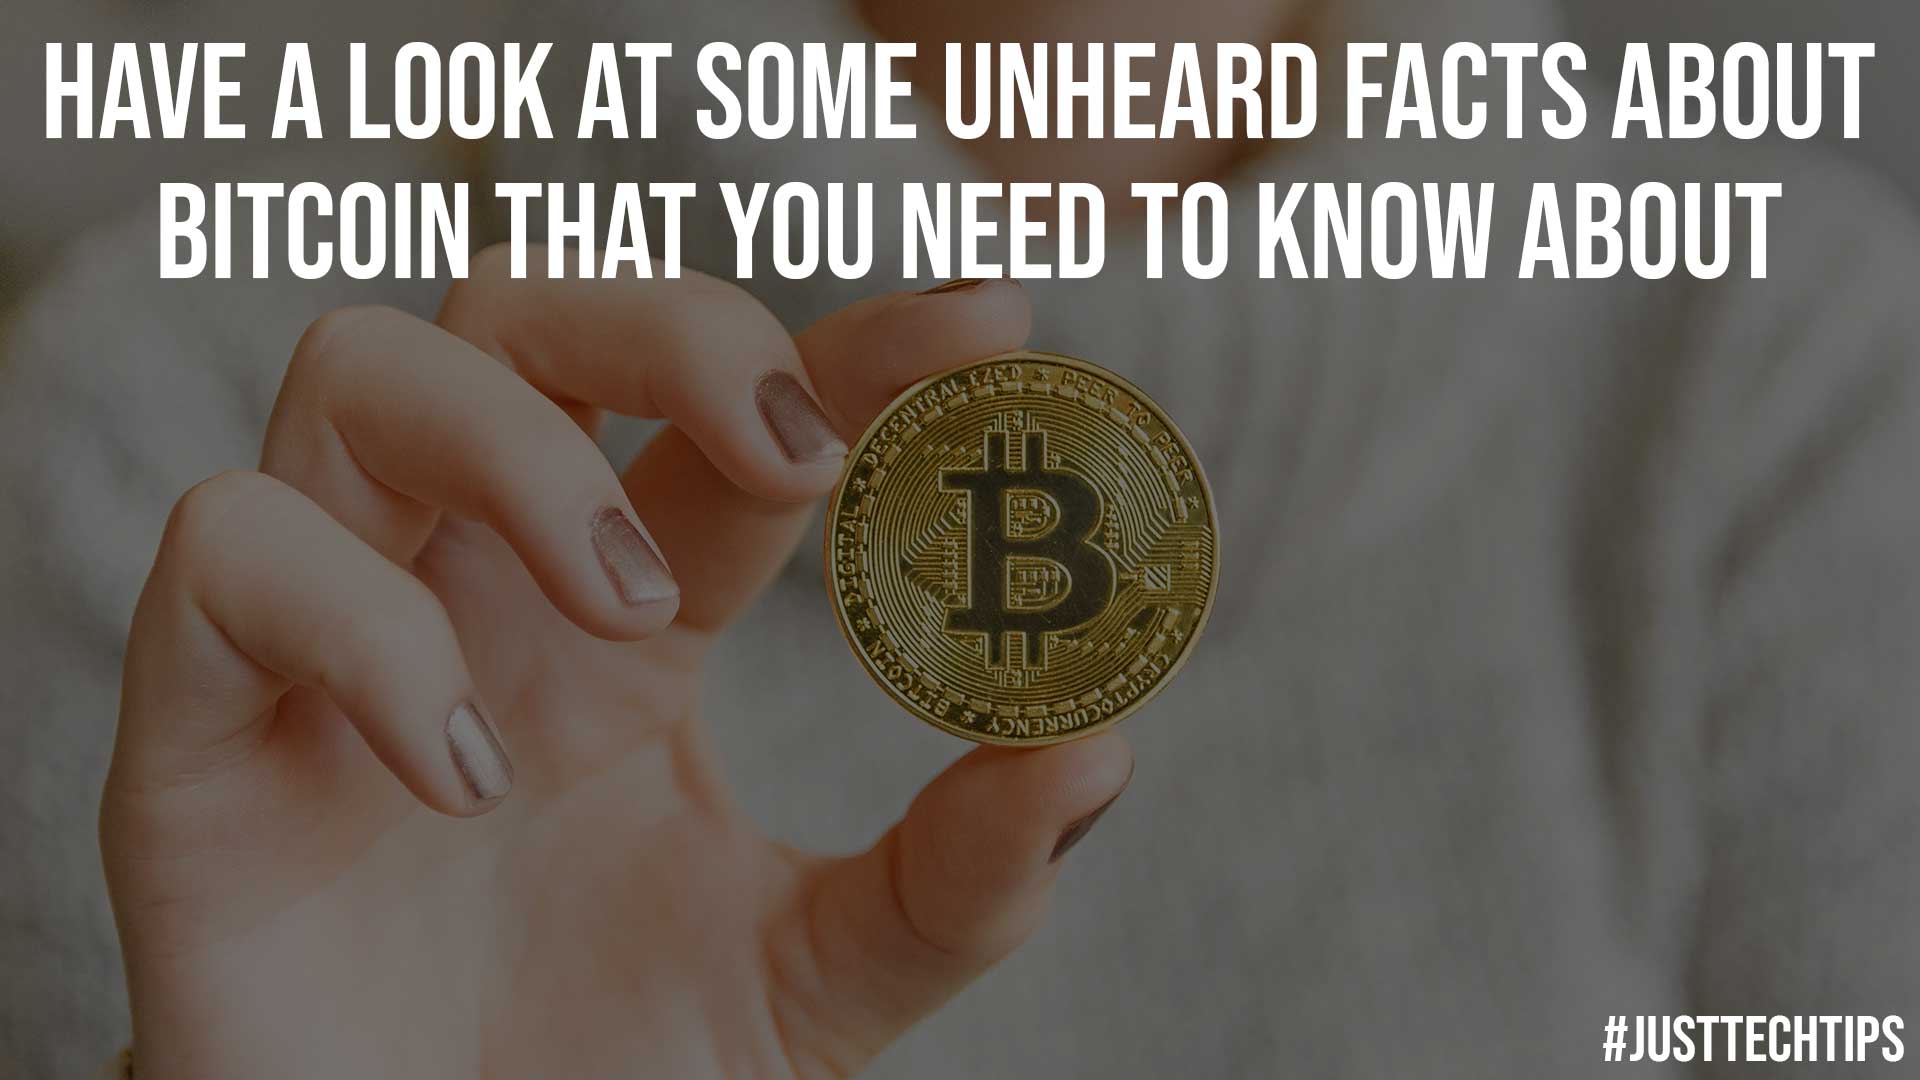 Have A Look At Some Unheard Facts About Bitcoin That You Need To Know About